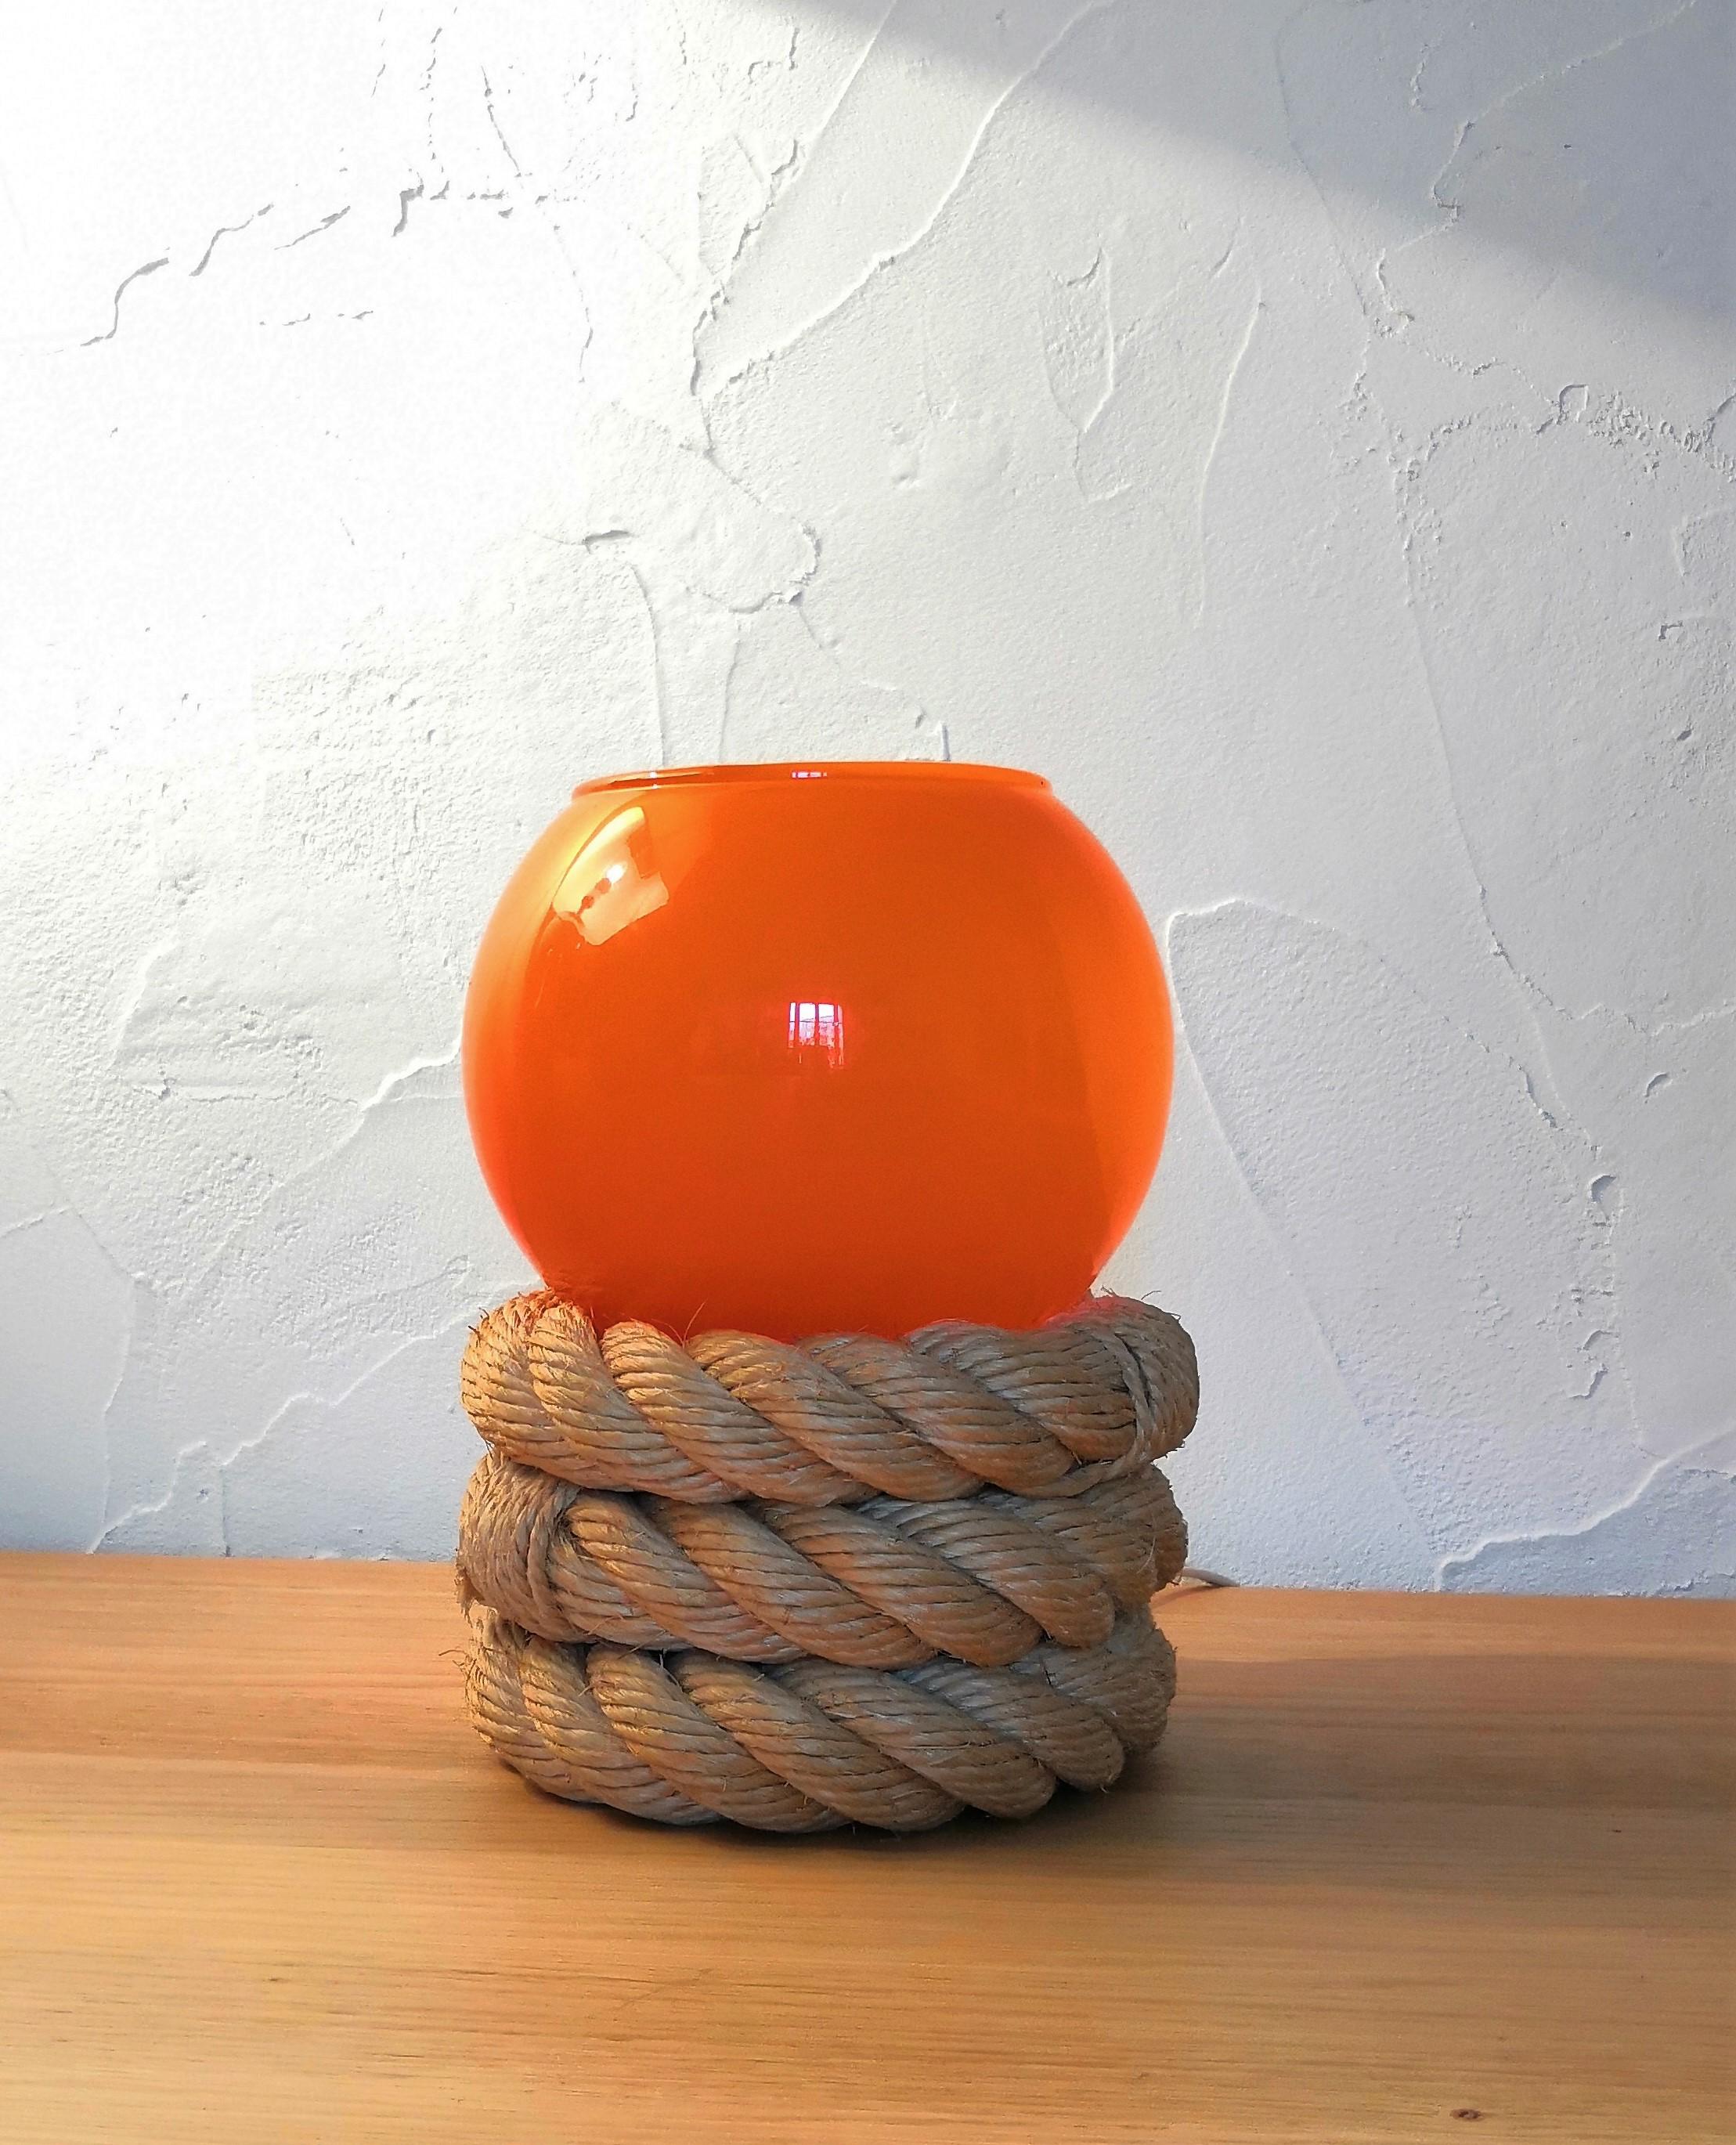 Tiered rope base
orange opaline
European socket and wiring
This item will ship from France
Price does not include shipping and possible customs related charges
can be returned to either Paris France or to NYC Manhattan store.